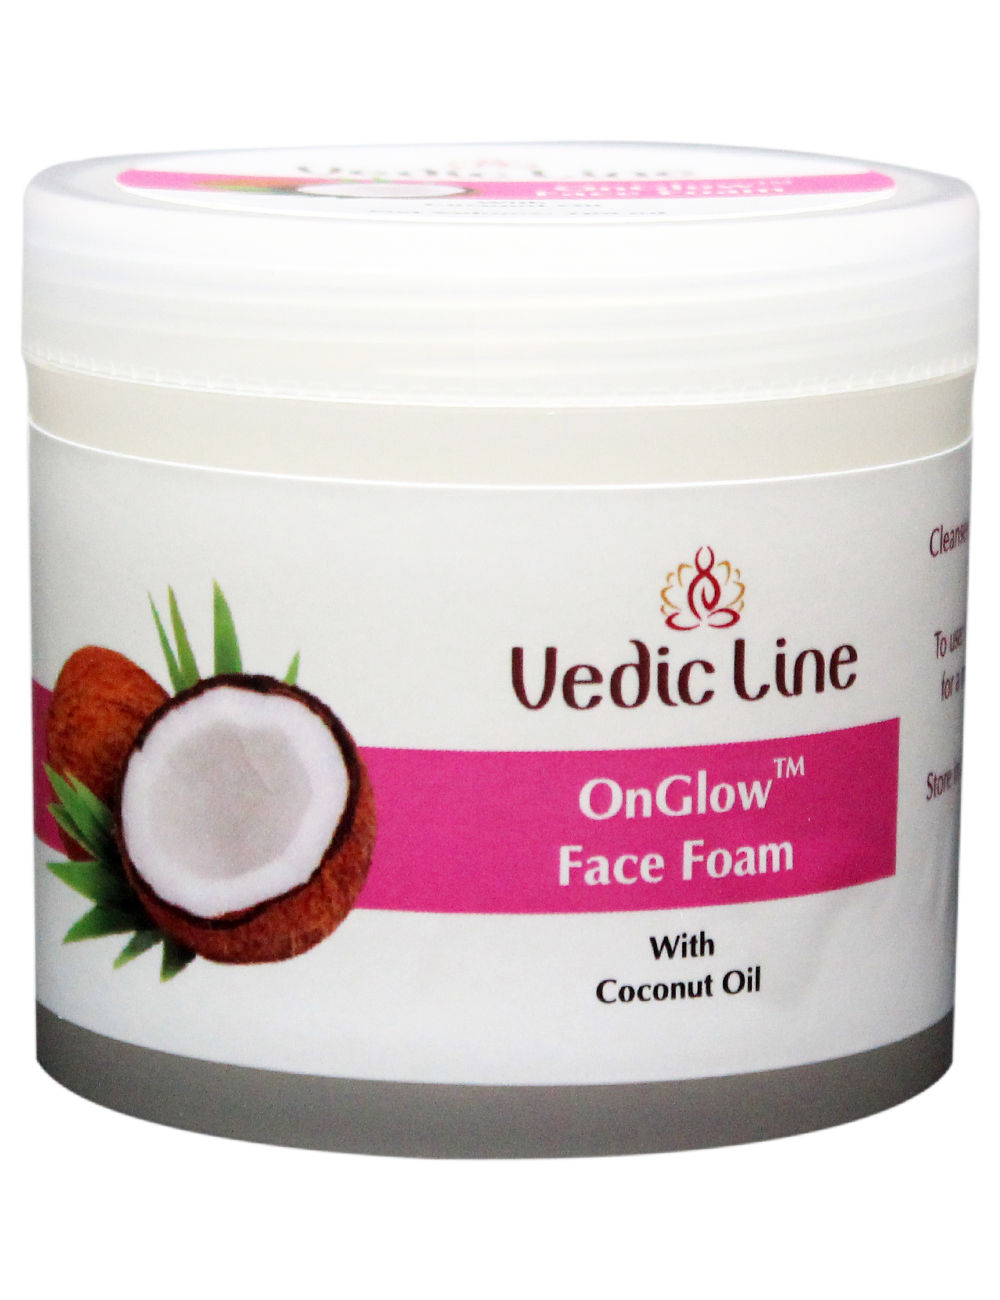 Vedic Line Onglow Face Foam With Coconut Oil